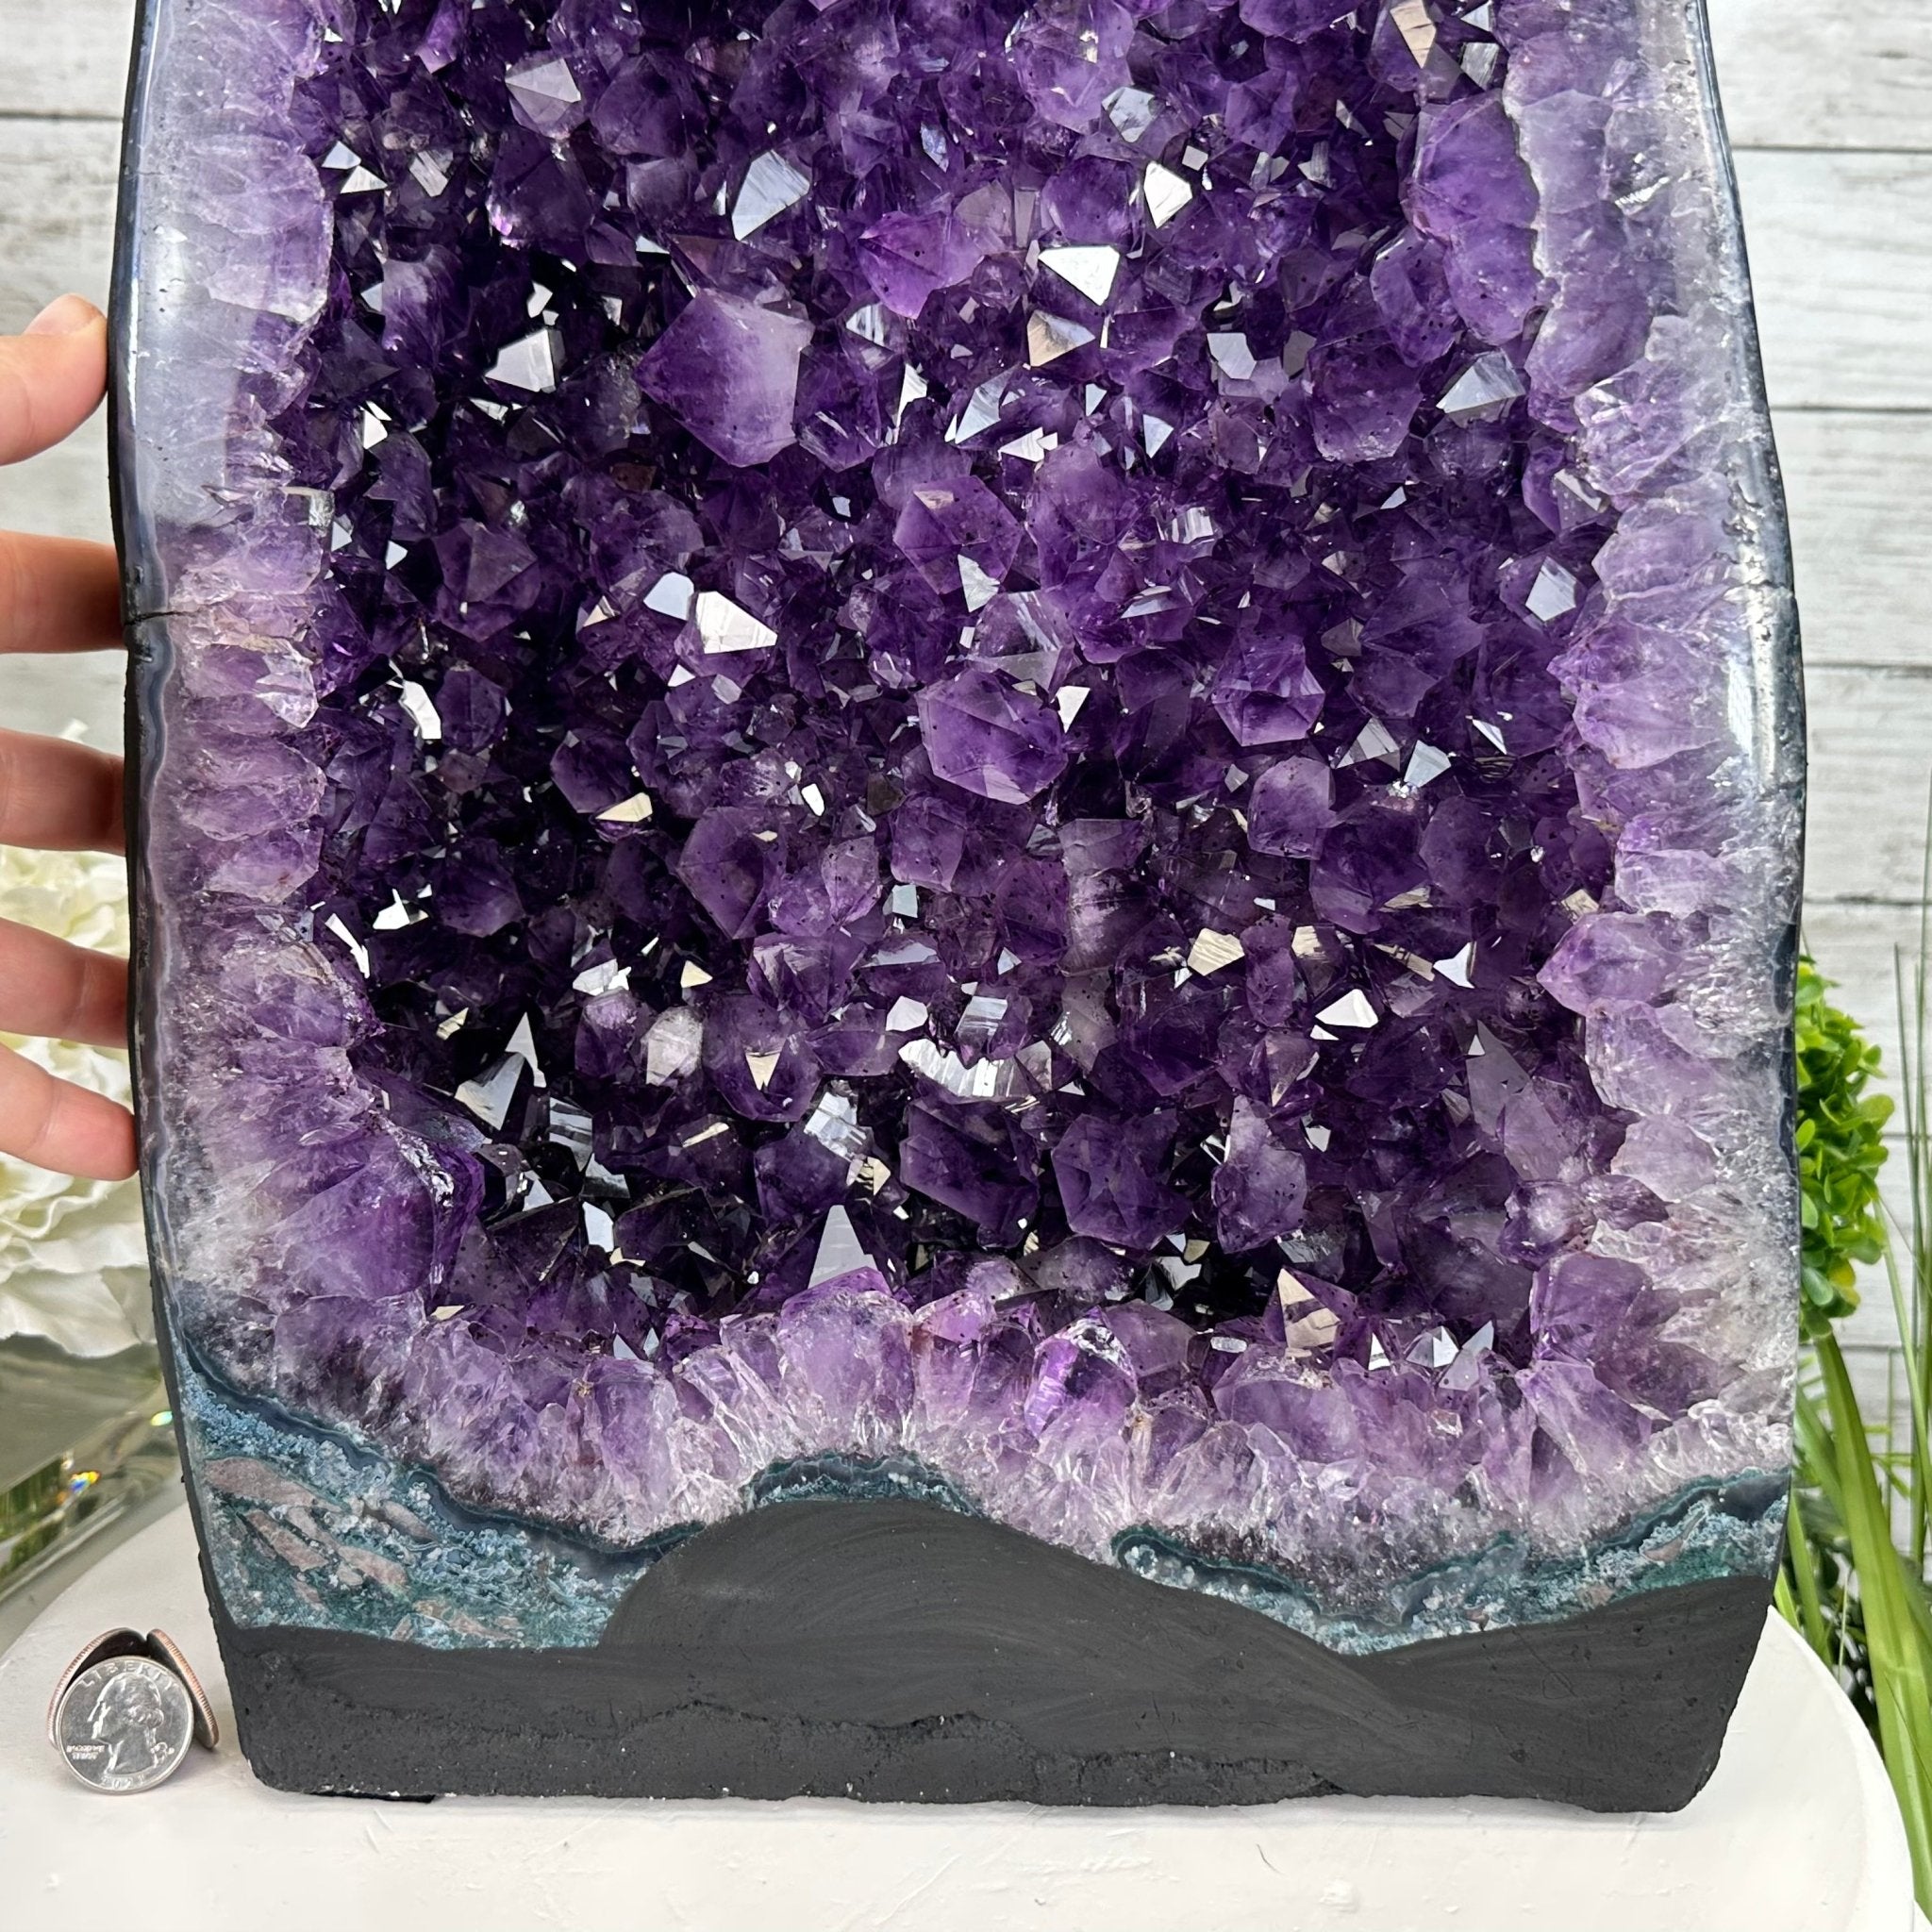 Extra Plus Quality Brazilian Amethyst Cathedral, 53.9 lbs & 20.5" Tall, Model #5601-1085 by Brazil Gems - Brazil GemsBrazil GemsExtra Plus Quality Brazilian Amethyst Cathedral, 53.9 lbs & 20.5" Tall, Model #5601-1085 by Brazil GemsCathedrals5601-1085